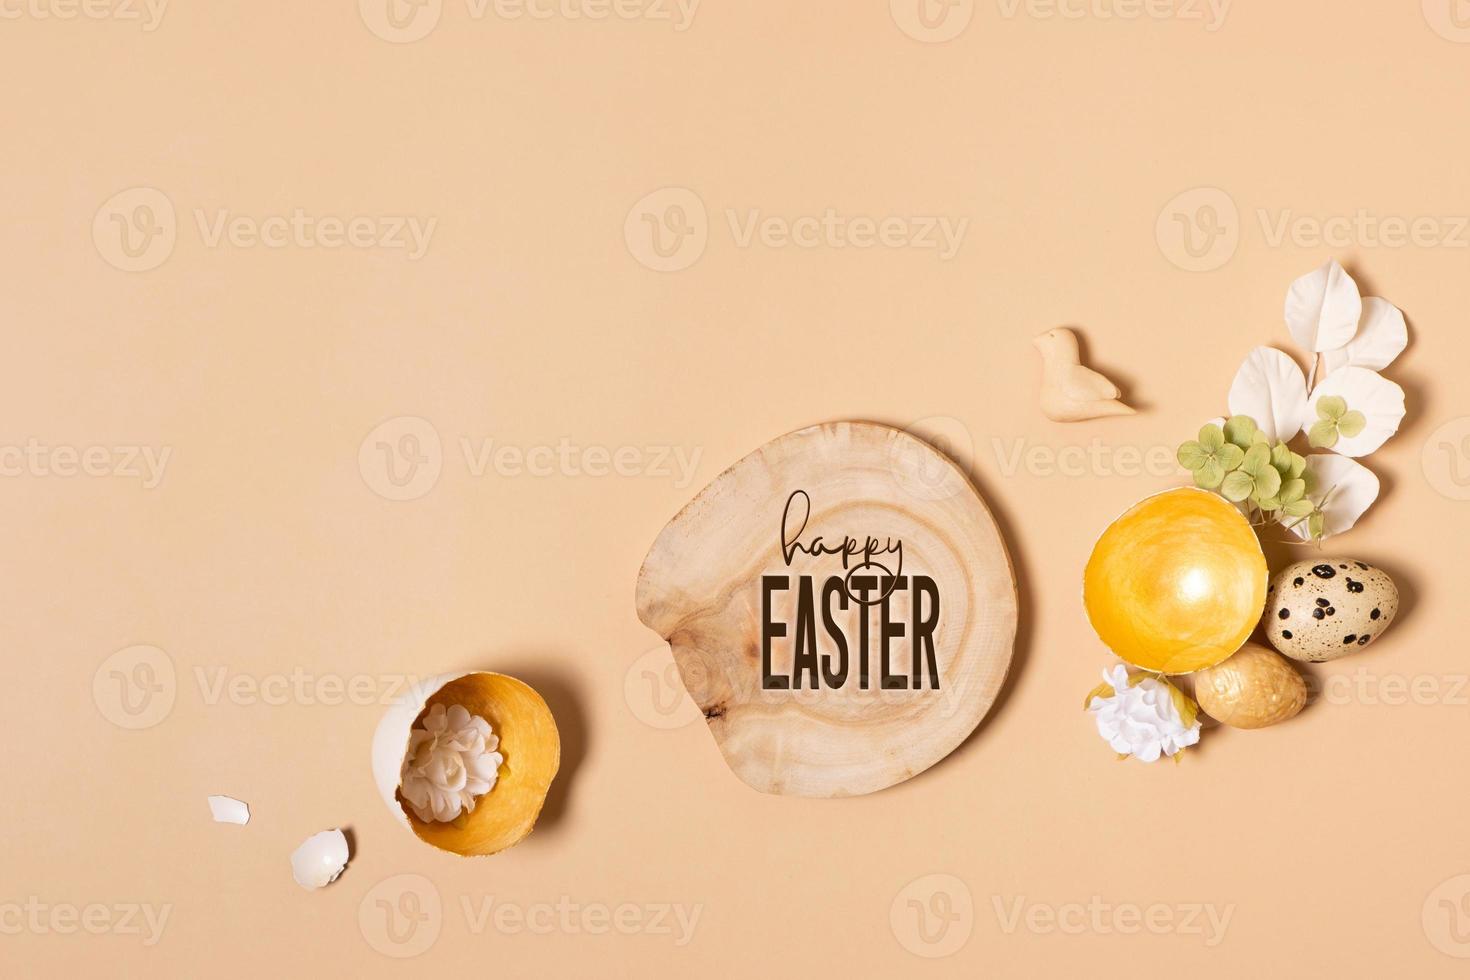 Happy Easter text and eggs composition with flowers and twigs. Happy Easter greeting card photo